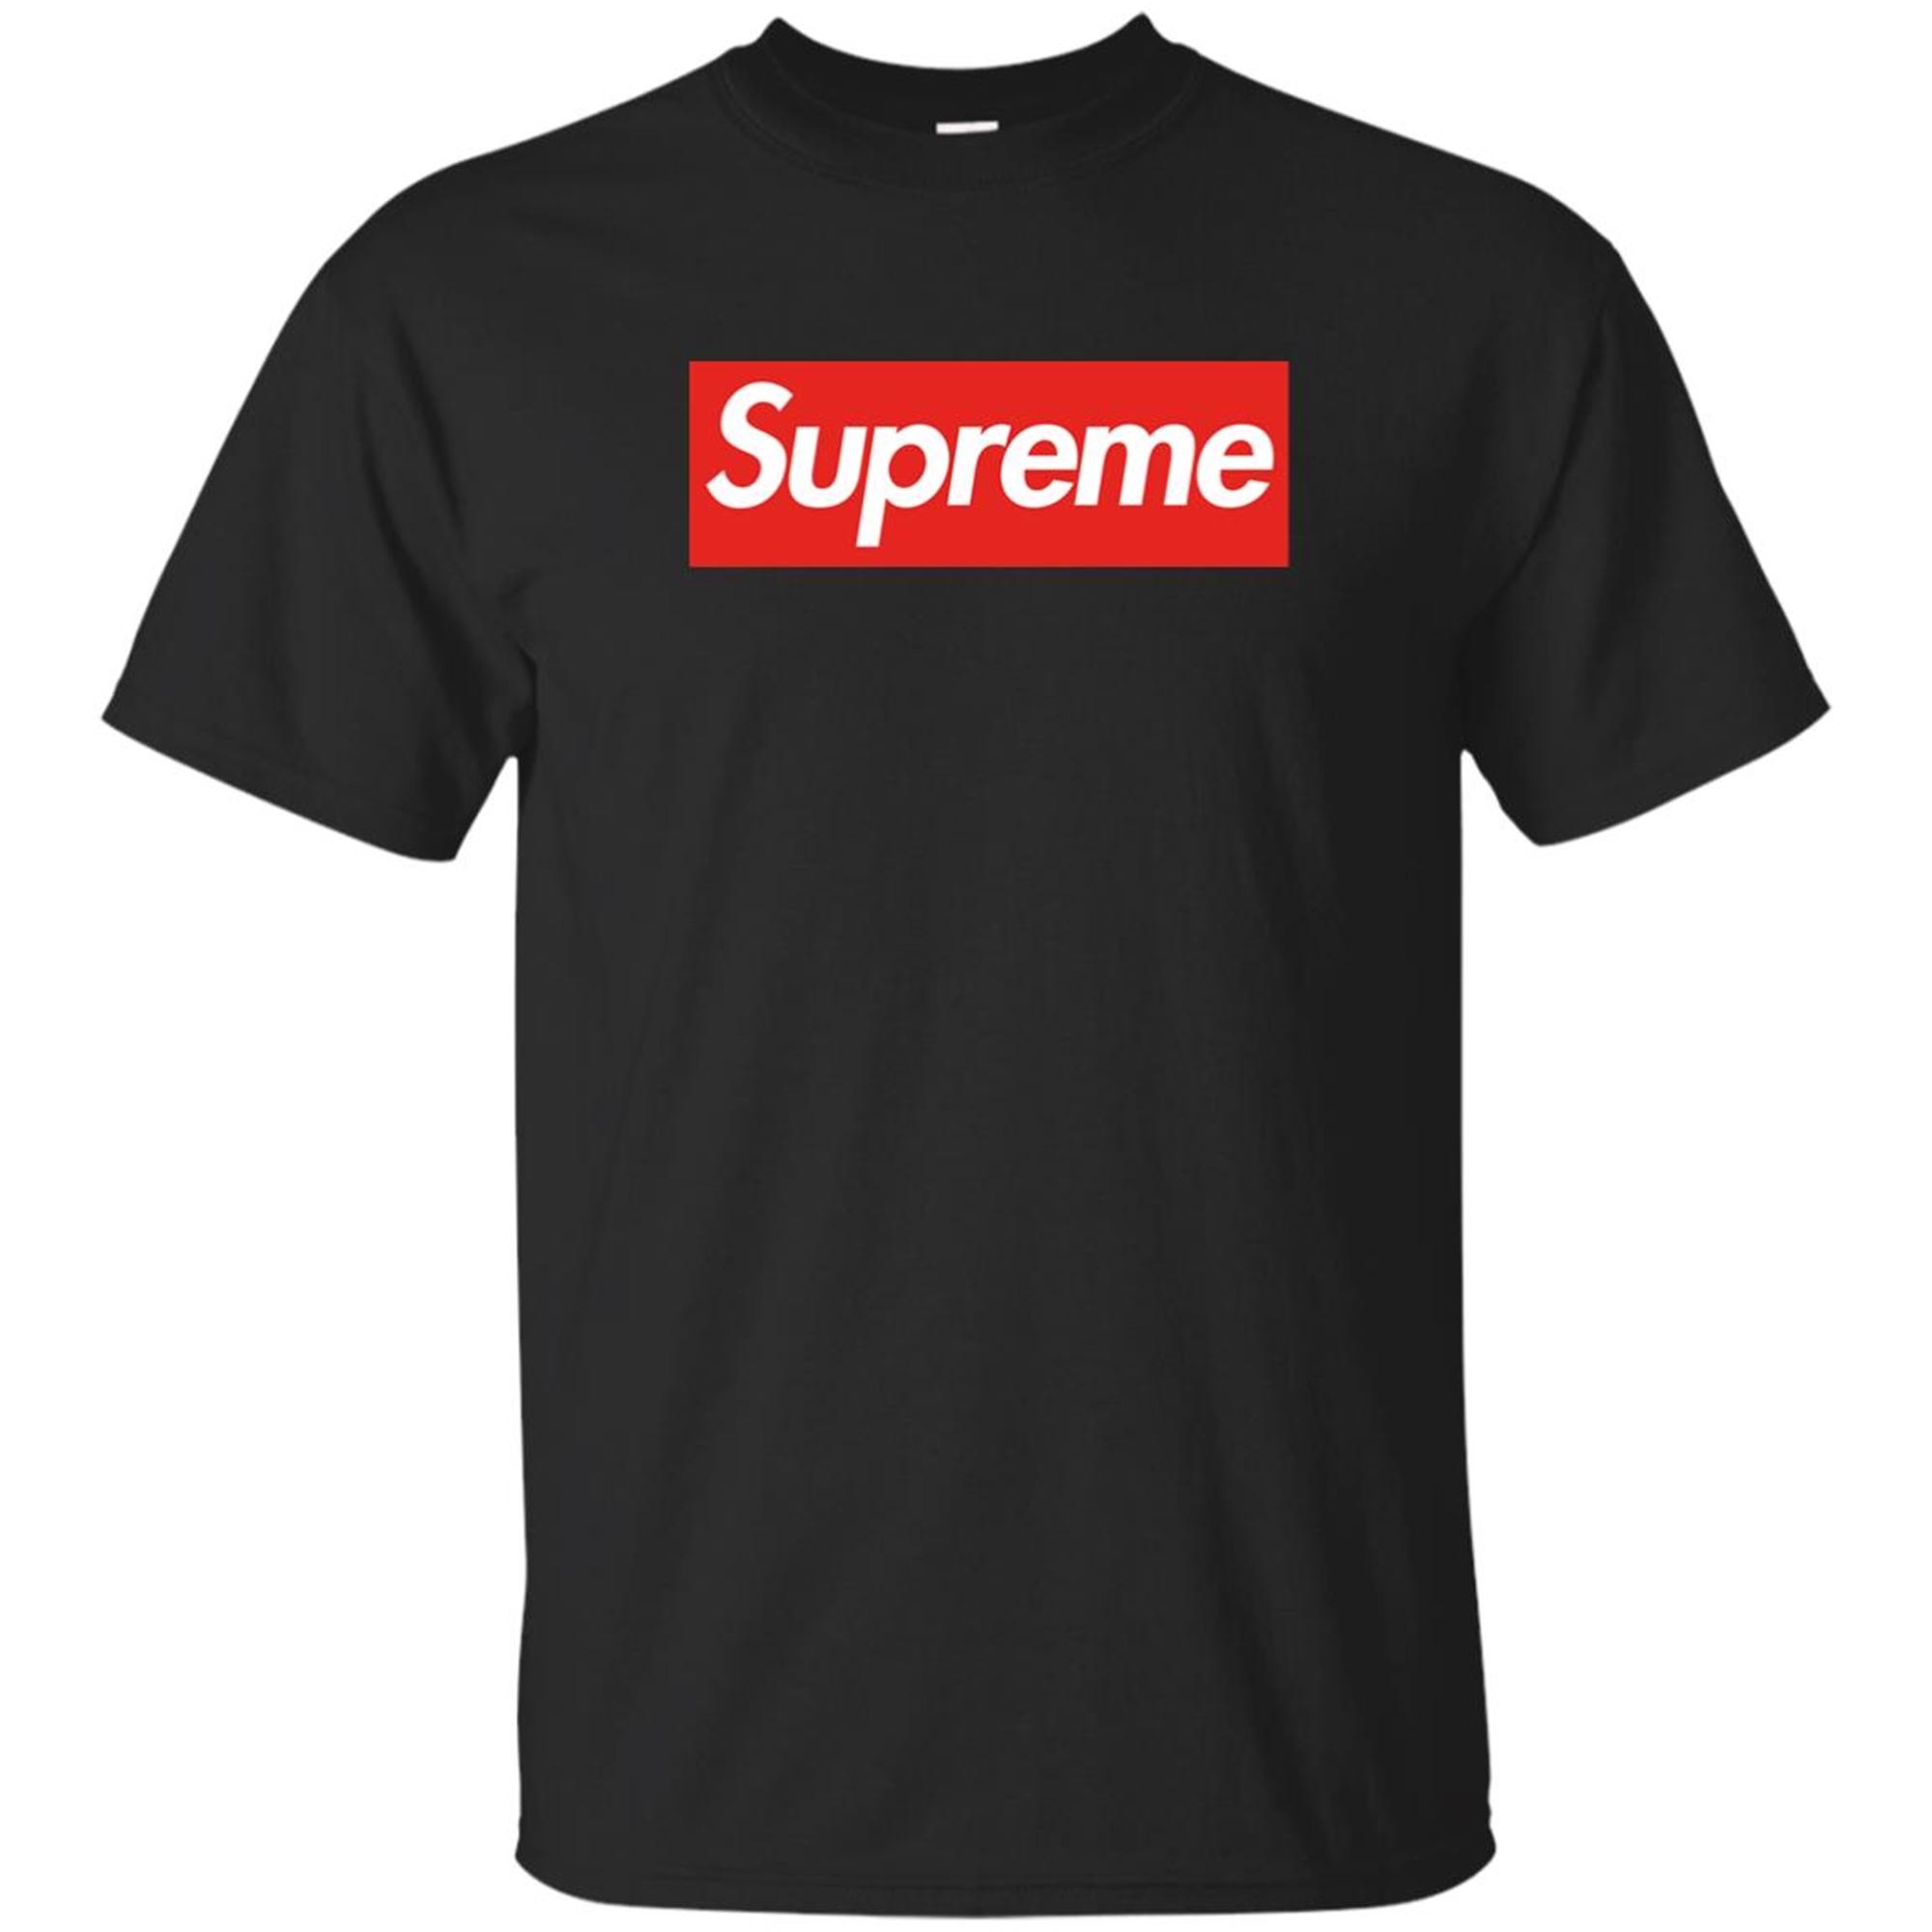 Supreme Shirt Best Gifts